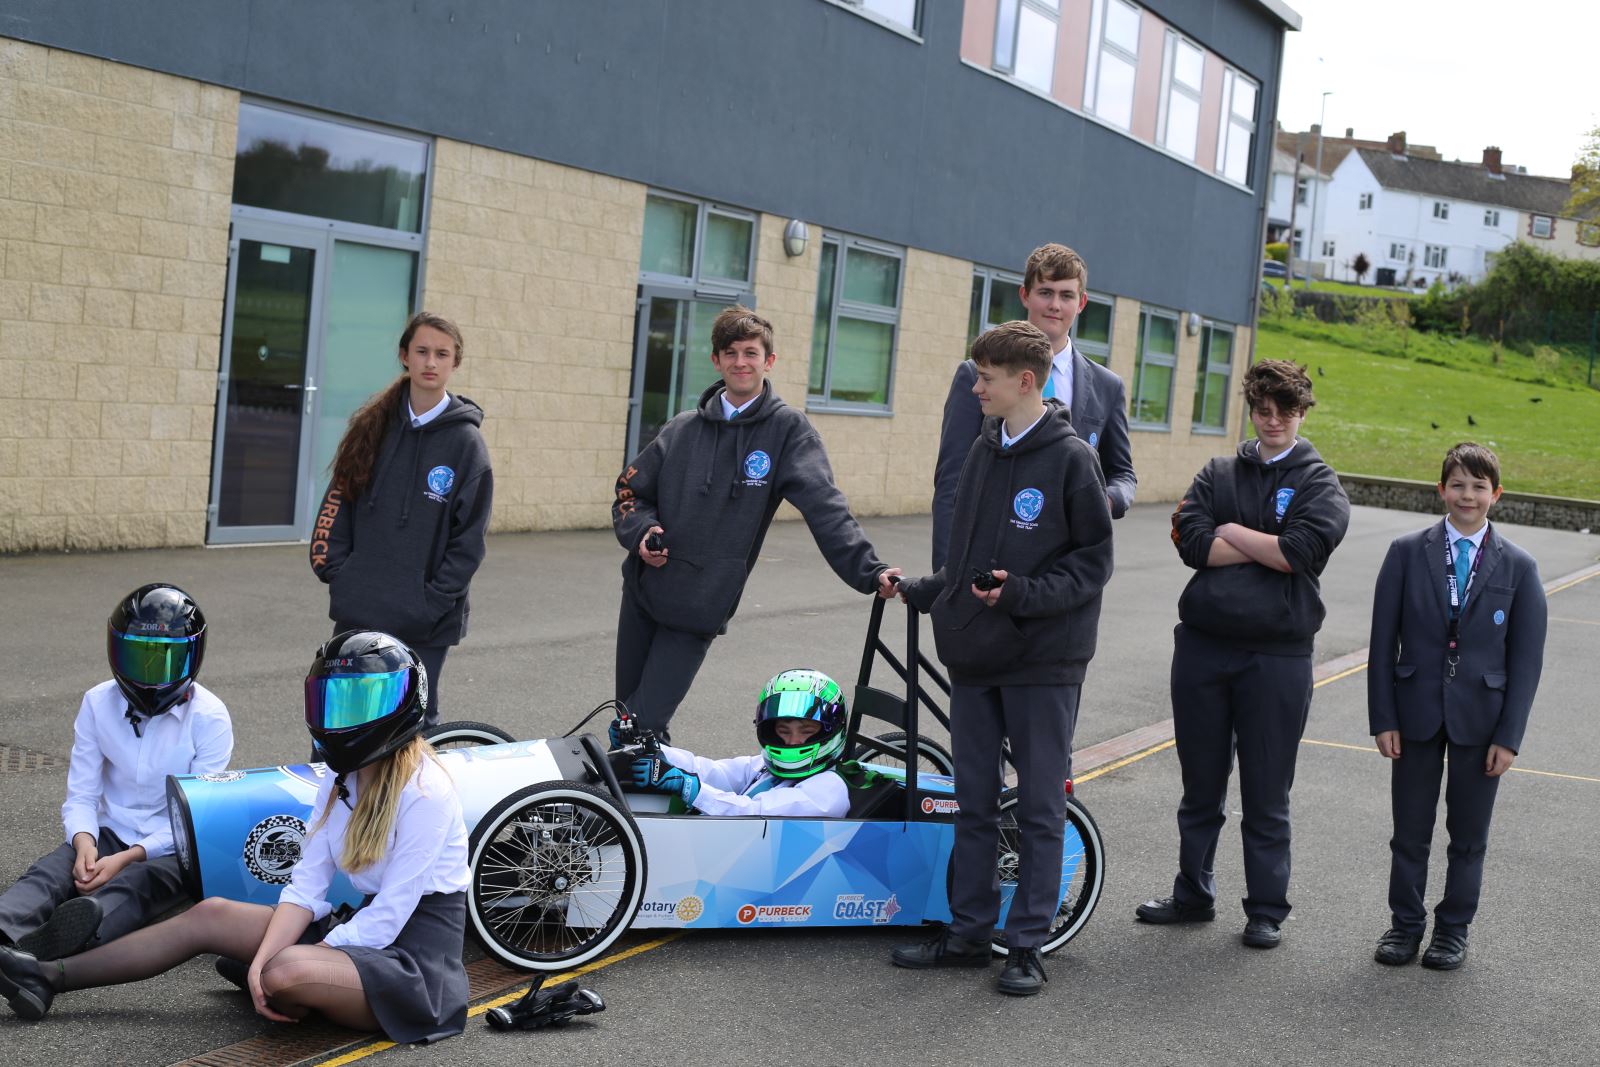 The Swanage School Race Team pose with the car